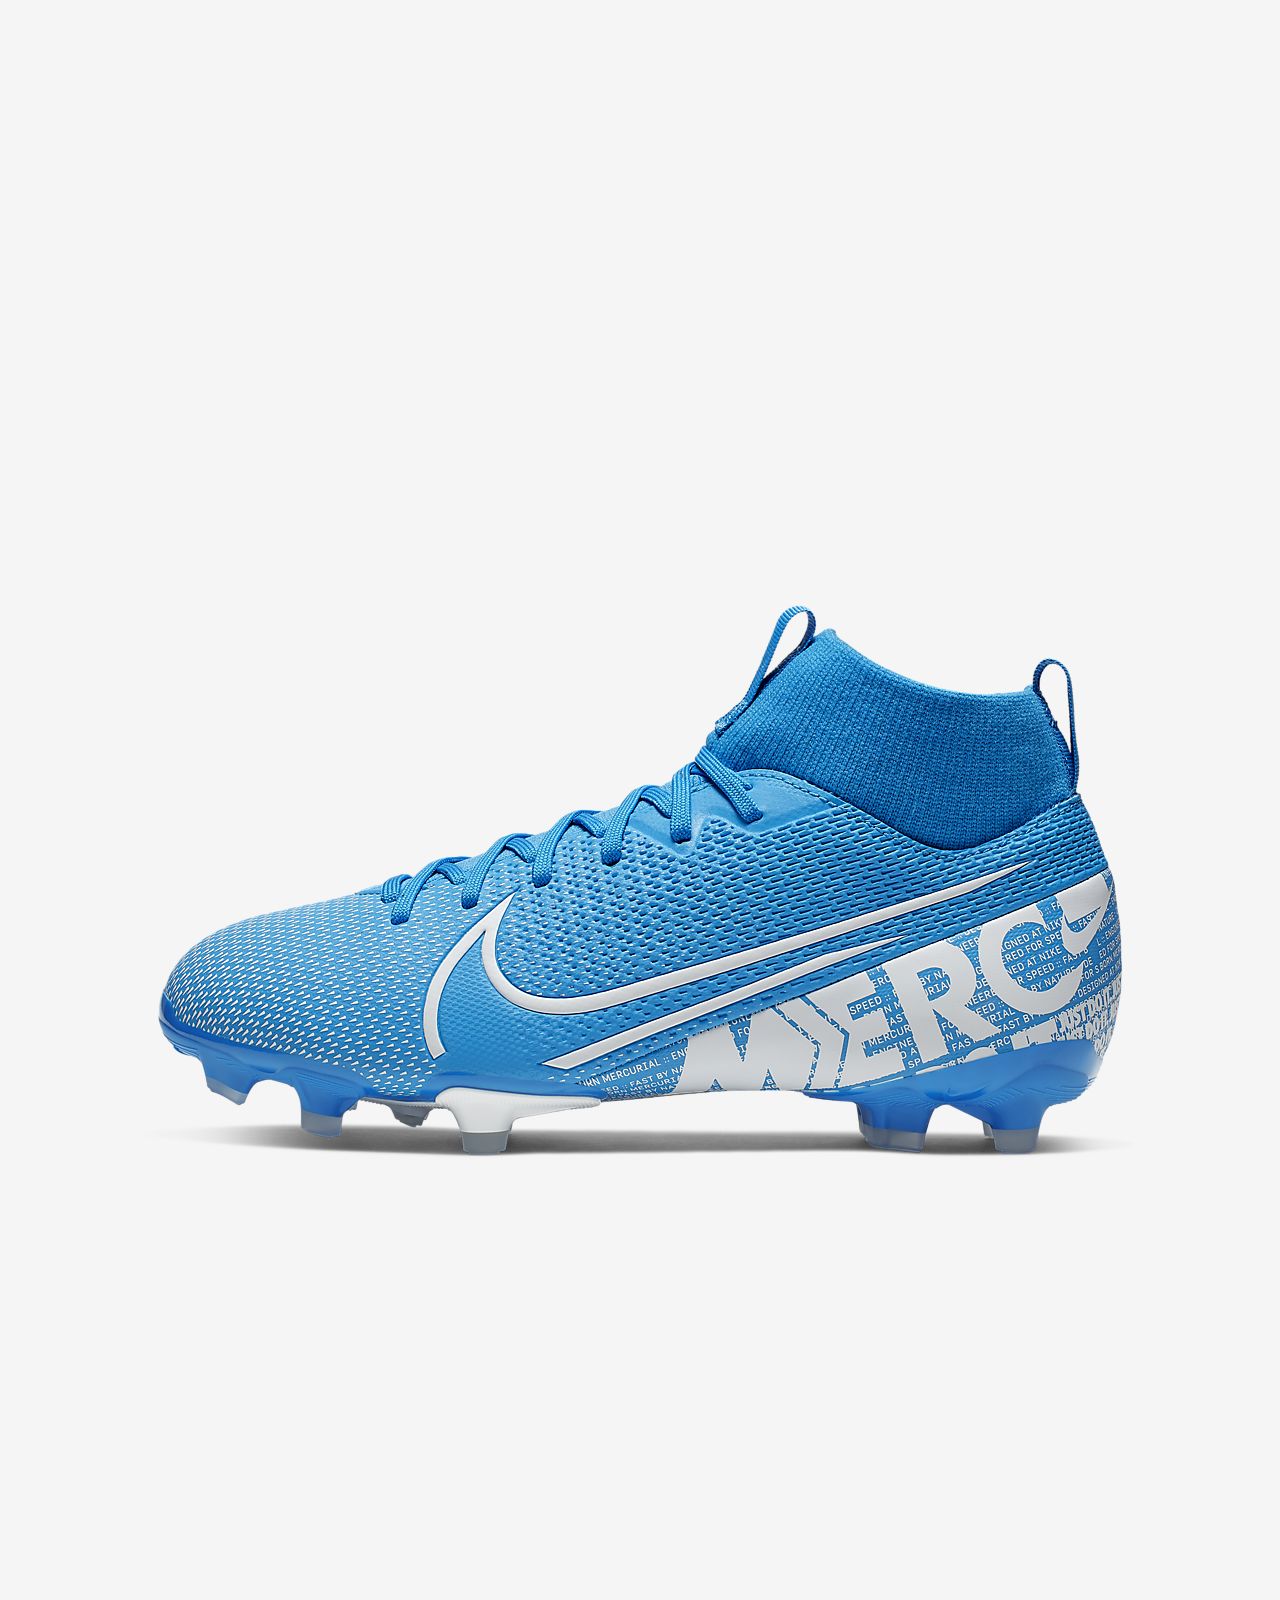 Nike Mercurial Superfly Heritage FG Football Boots White